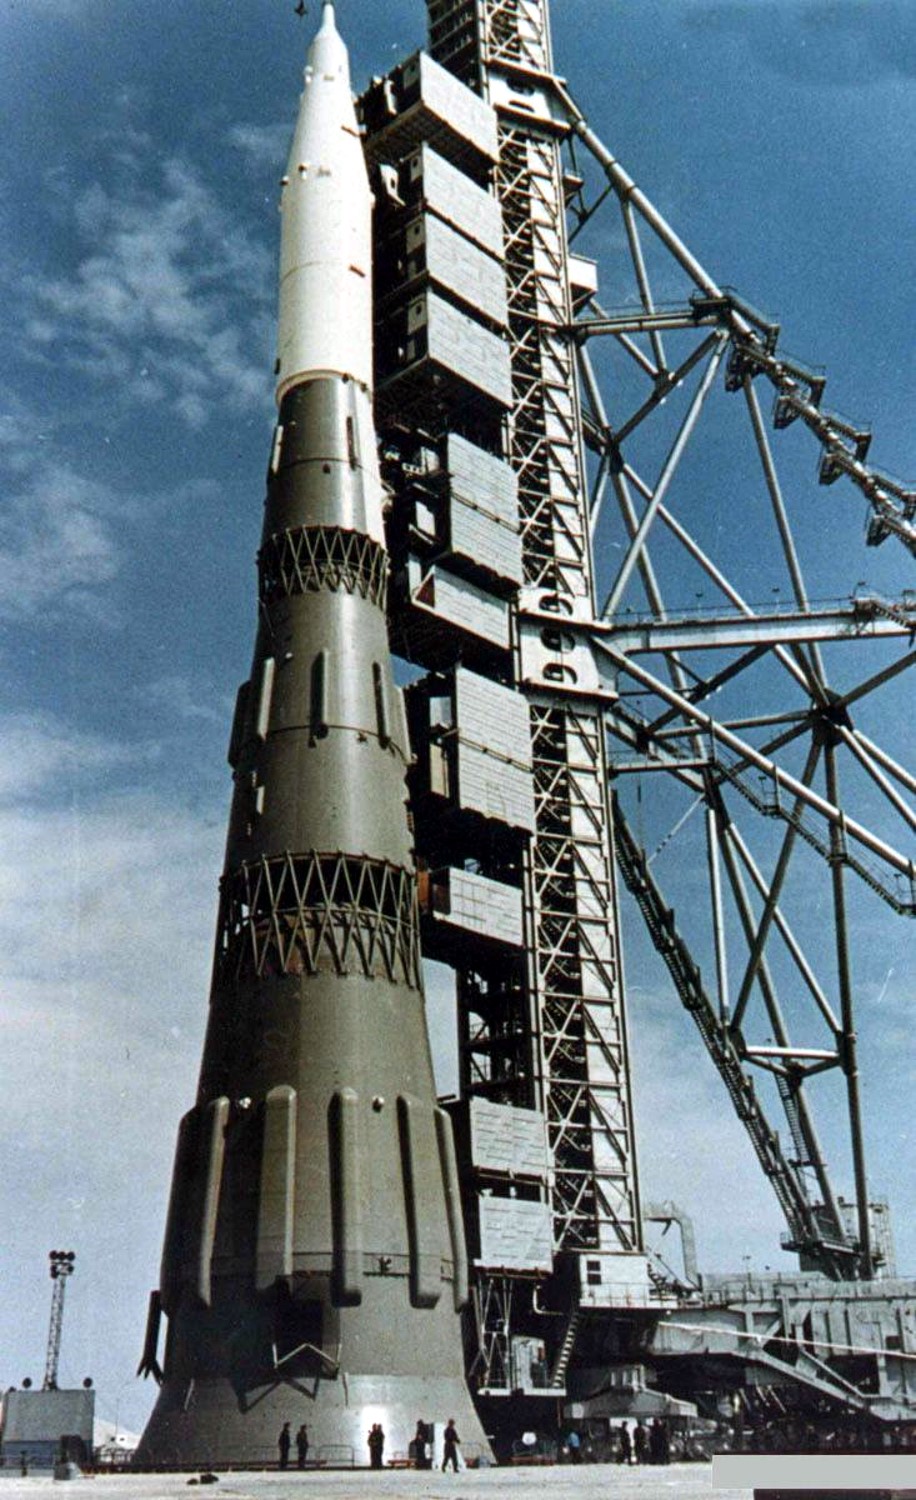 The N1 rocket on the Baikonur launch pad